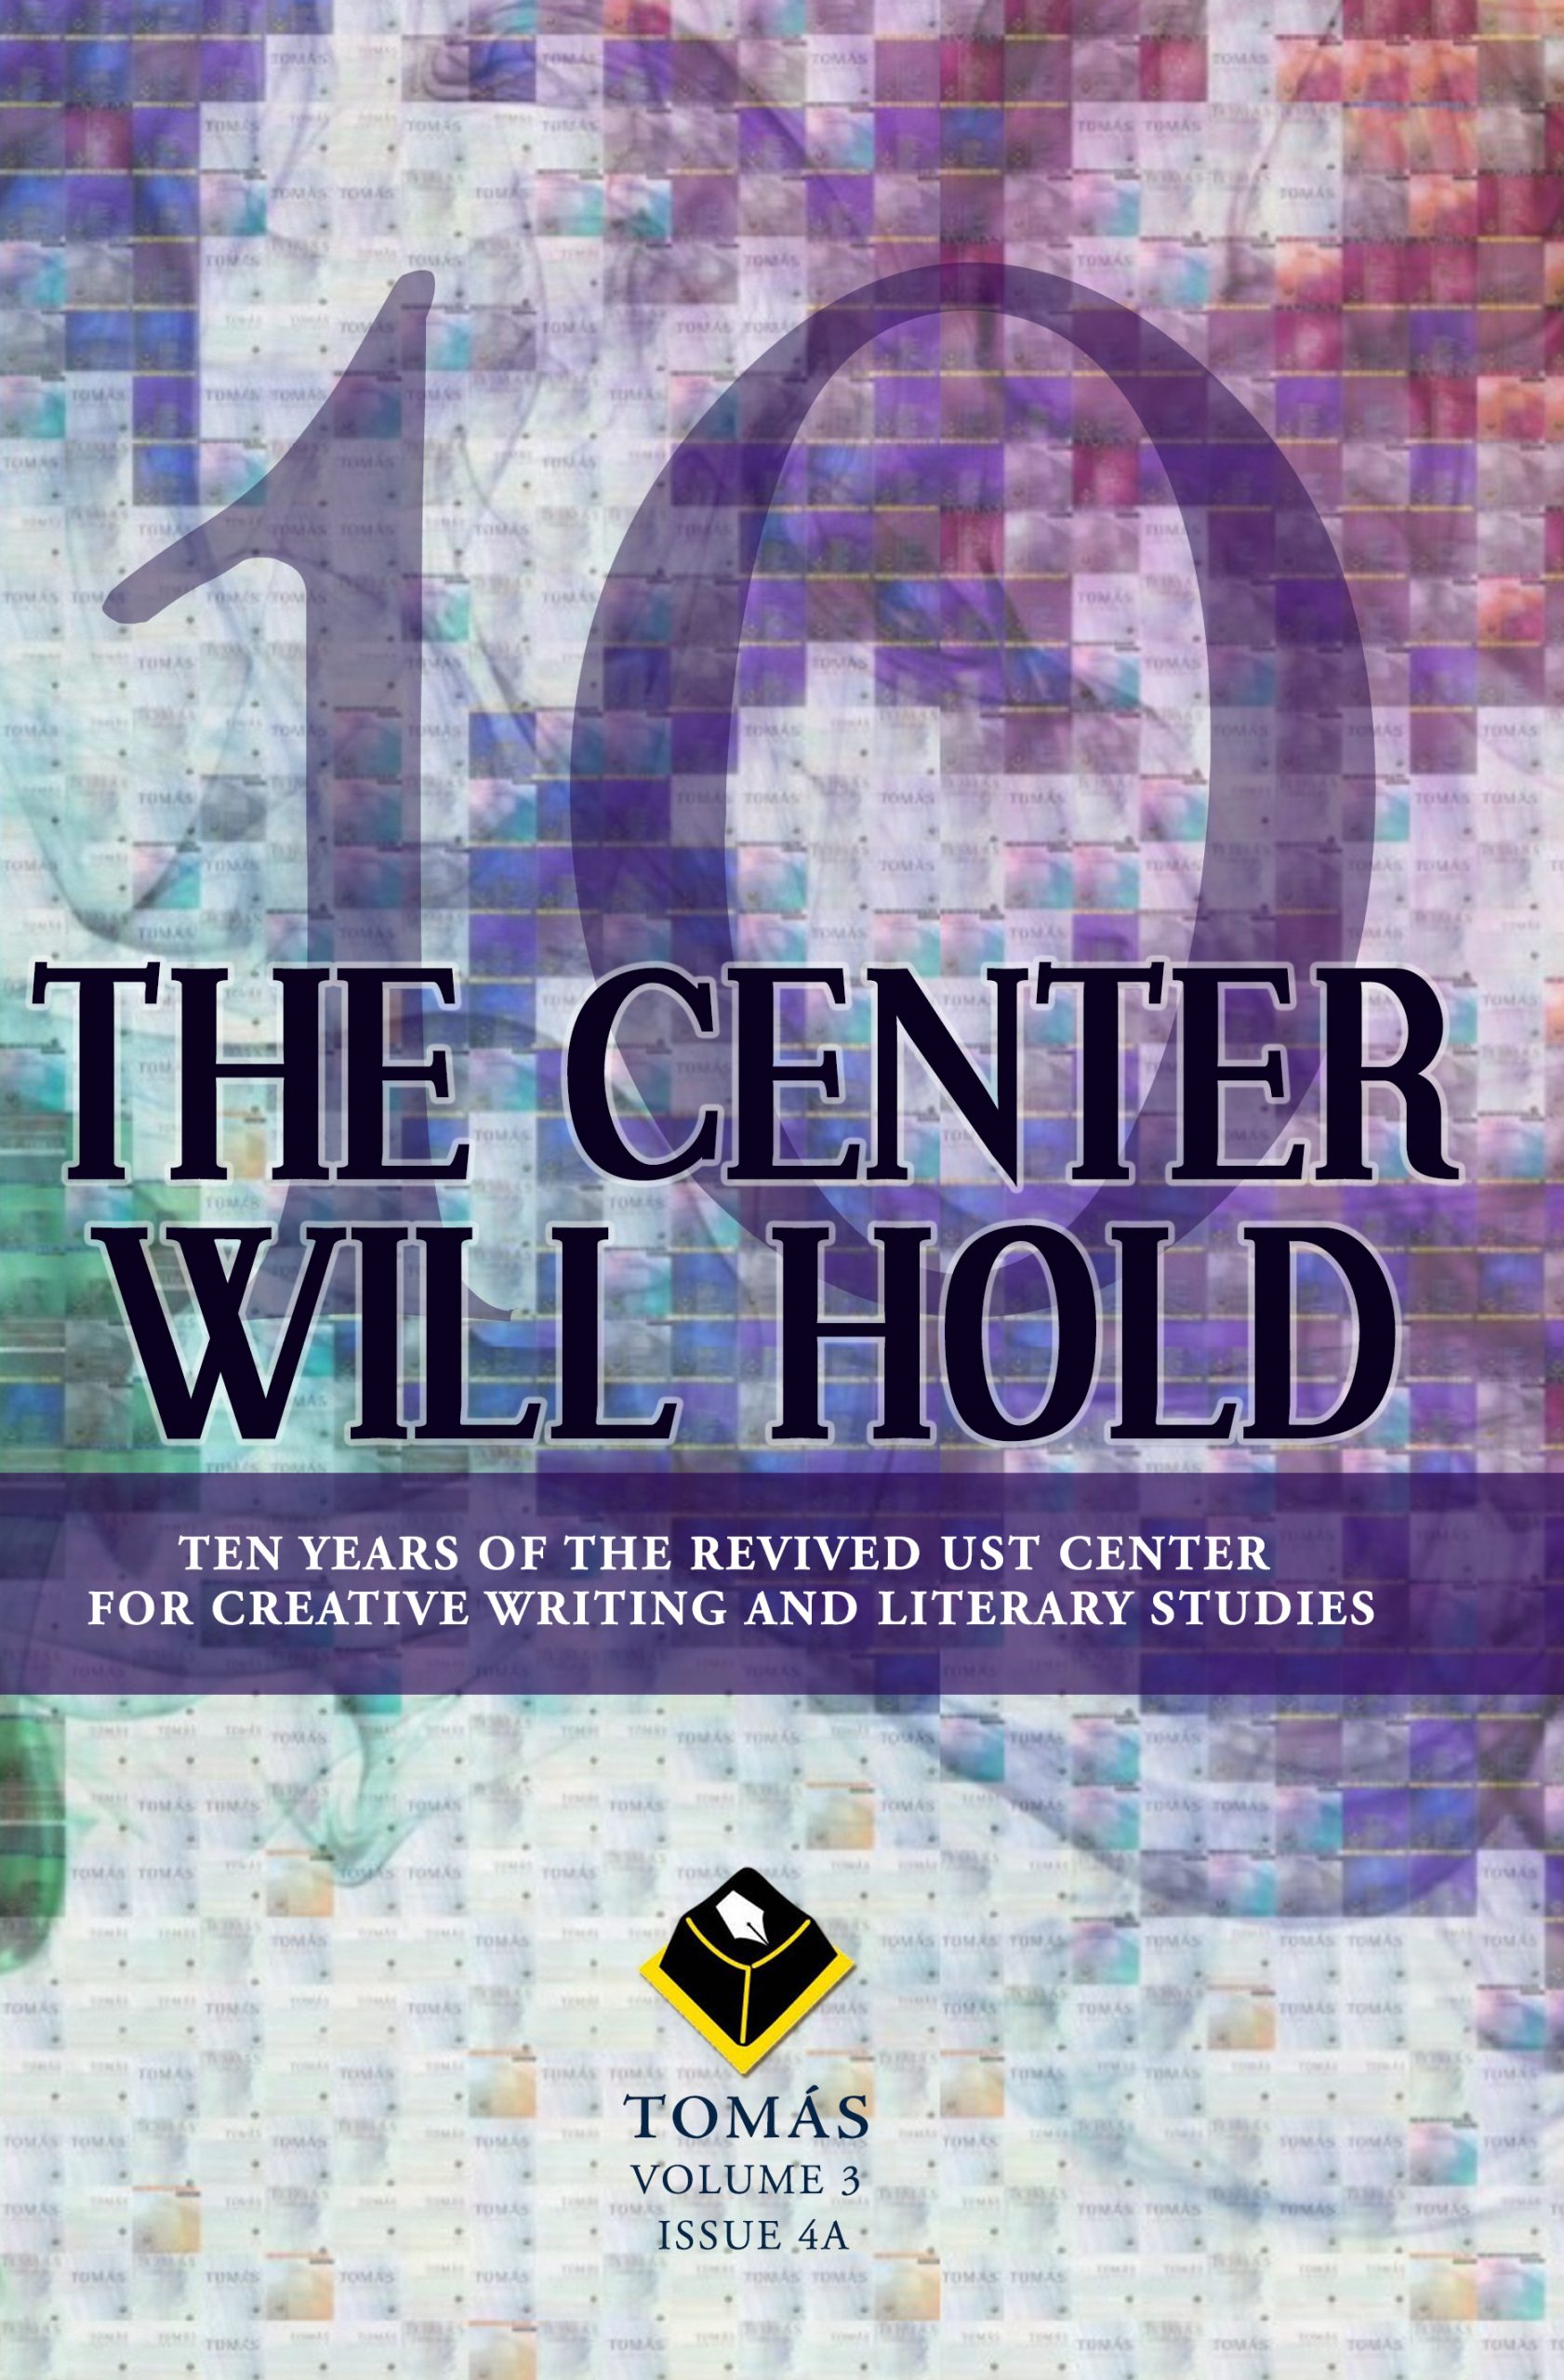 ust center for creative writing and literary studies